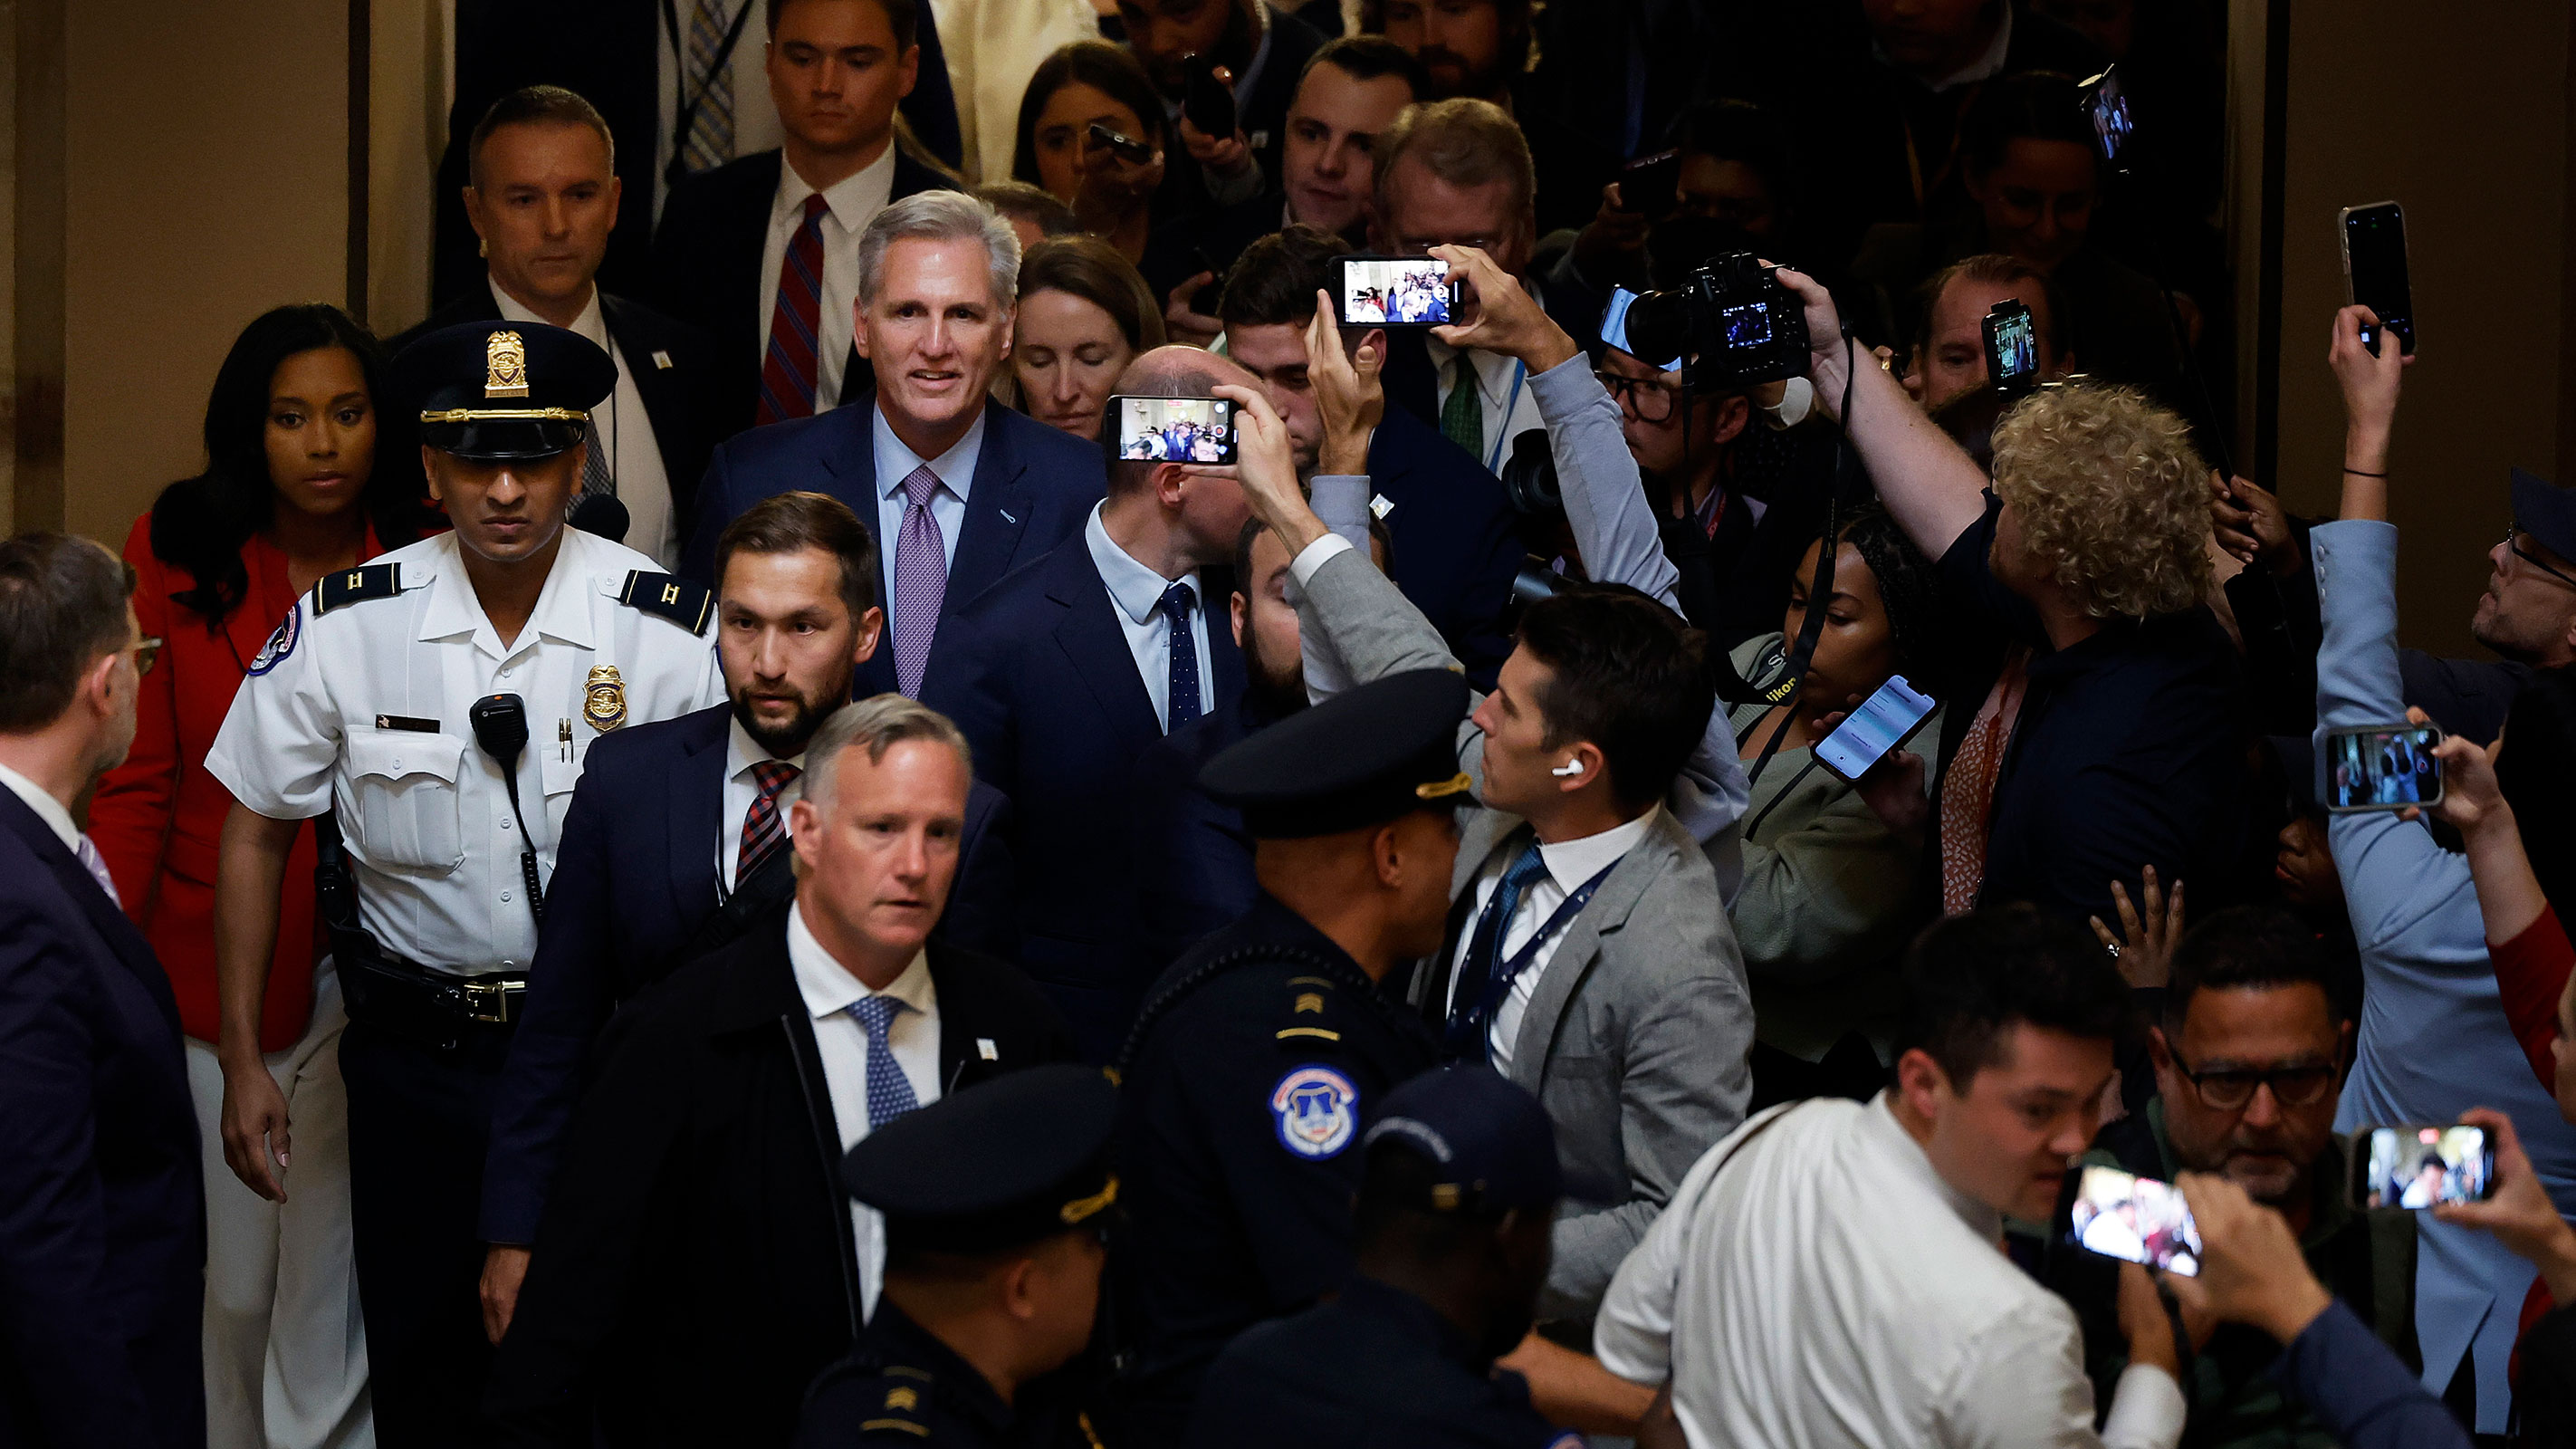 Former Speaker of the House Kevin McCarthy is surrounded by staff, security and journalists as he walks through Statuary Hall after he was ousted at the Capitol on October 3, in Washington, DC.